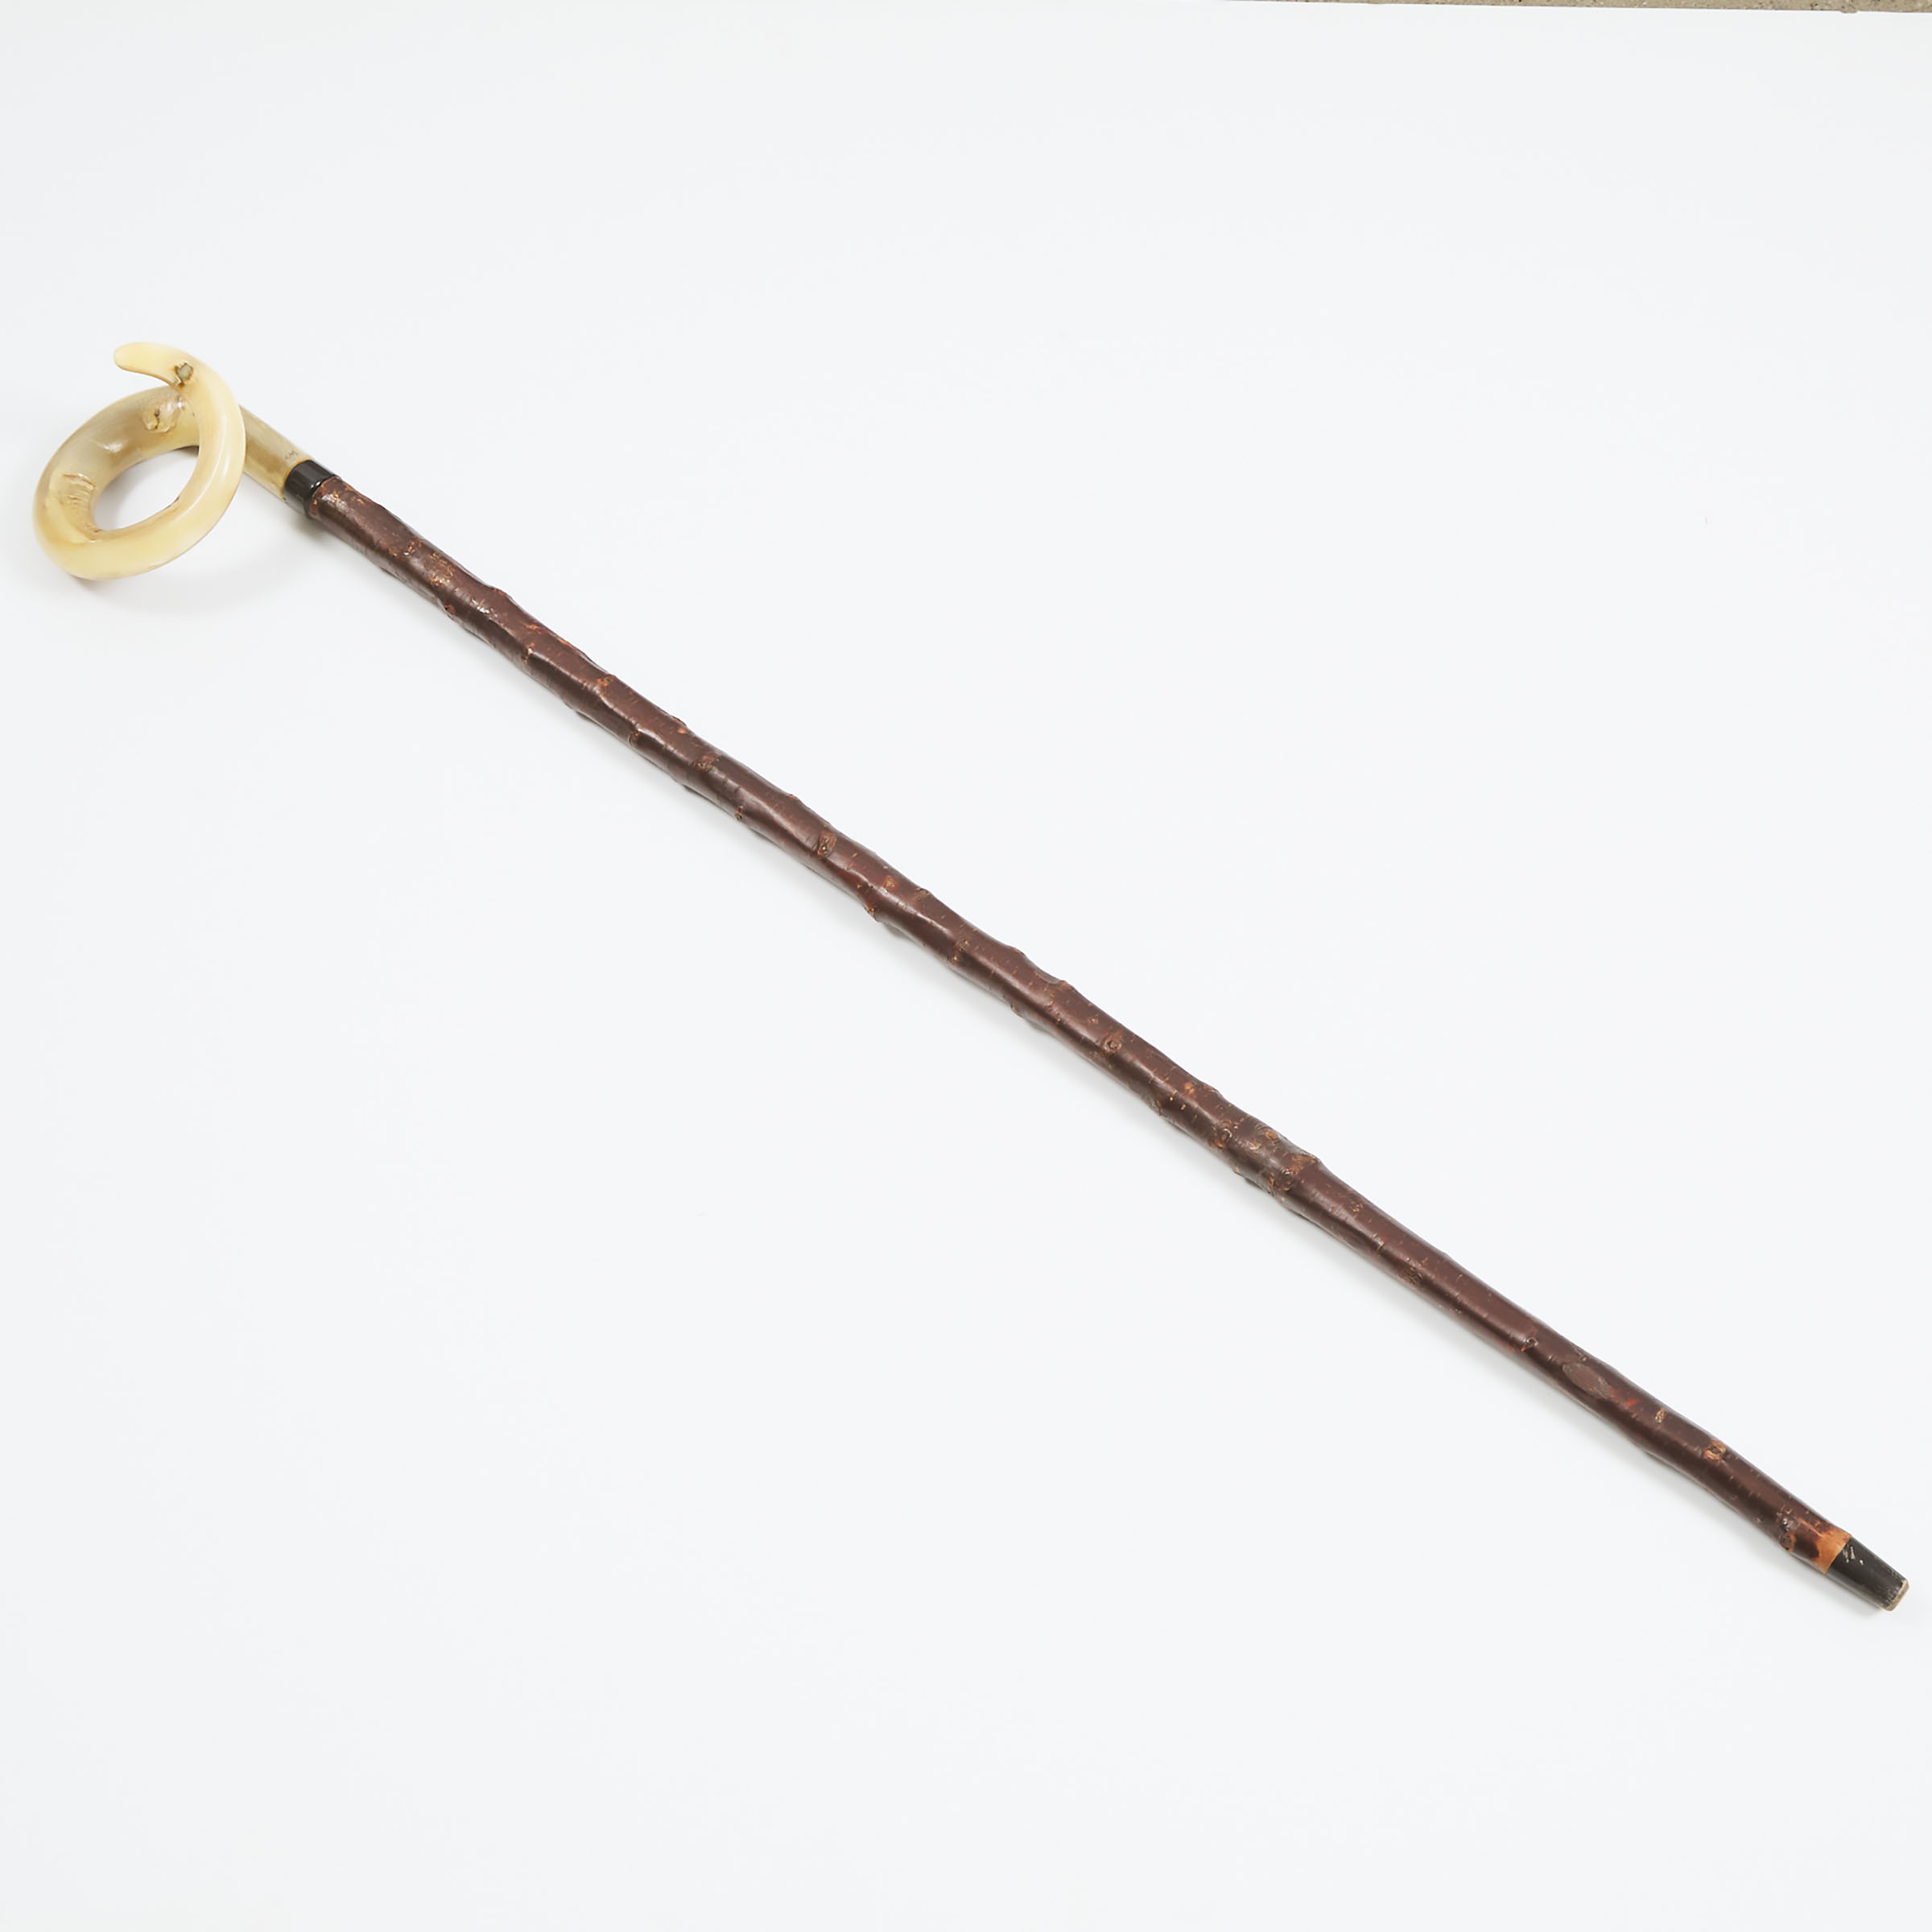 Goat Horn Walking Stick, early 20th century